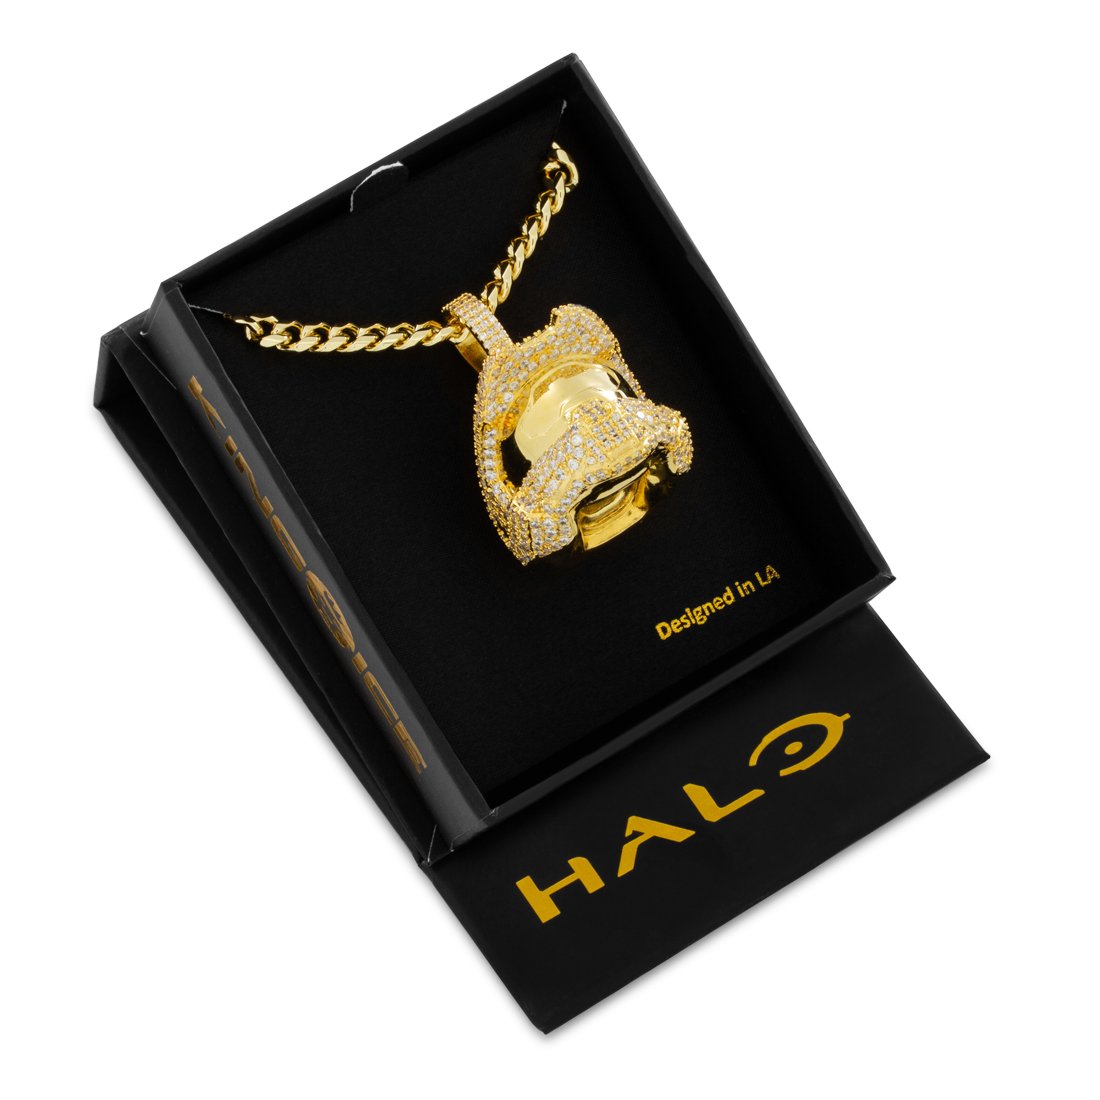 Master Chief Helmet Necklace, Halo Jewelry Collection